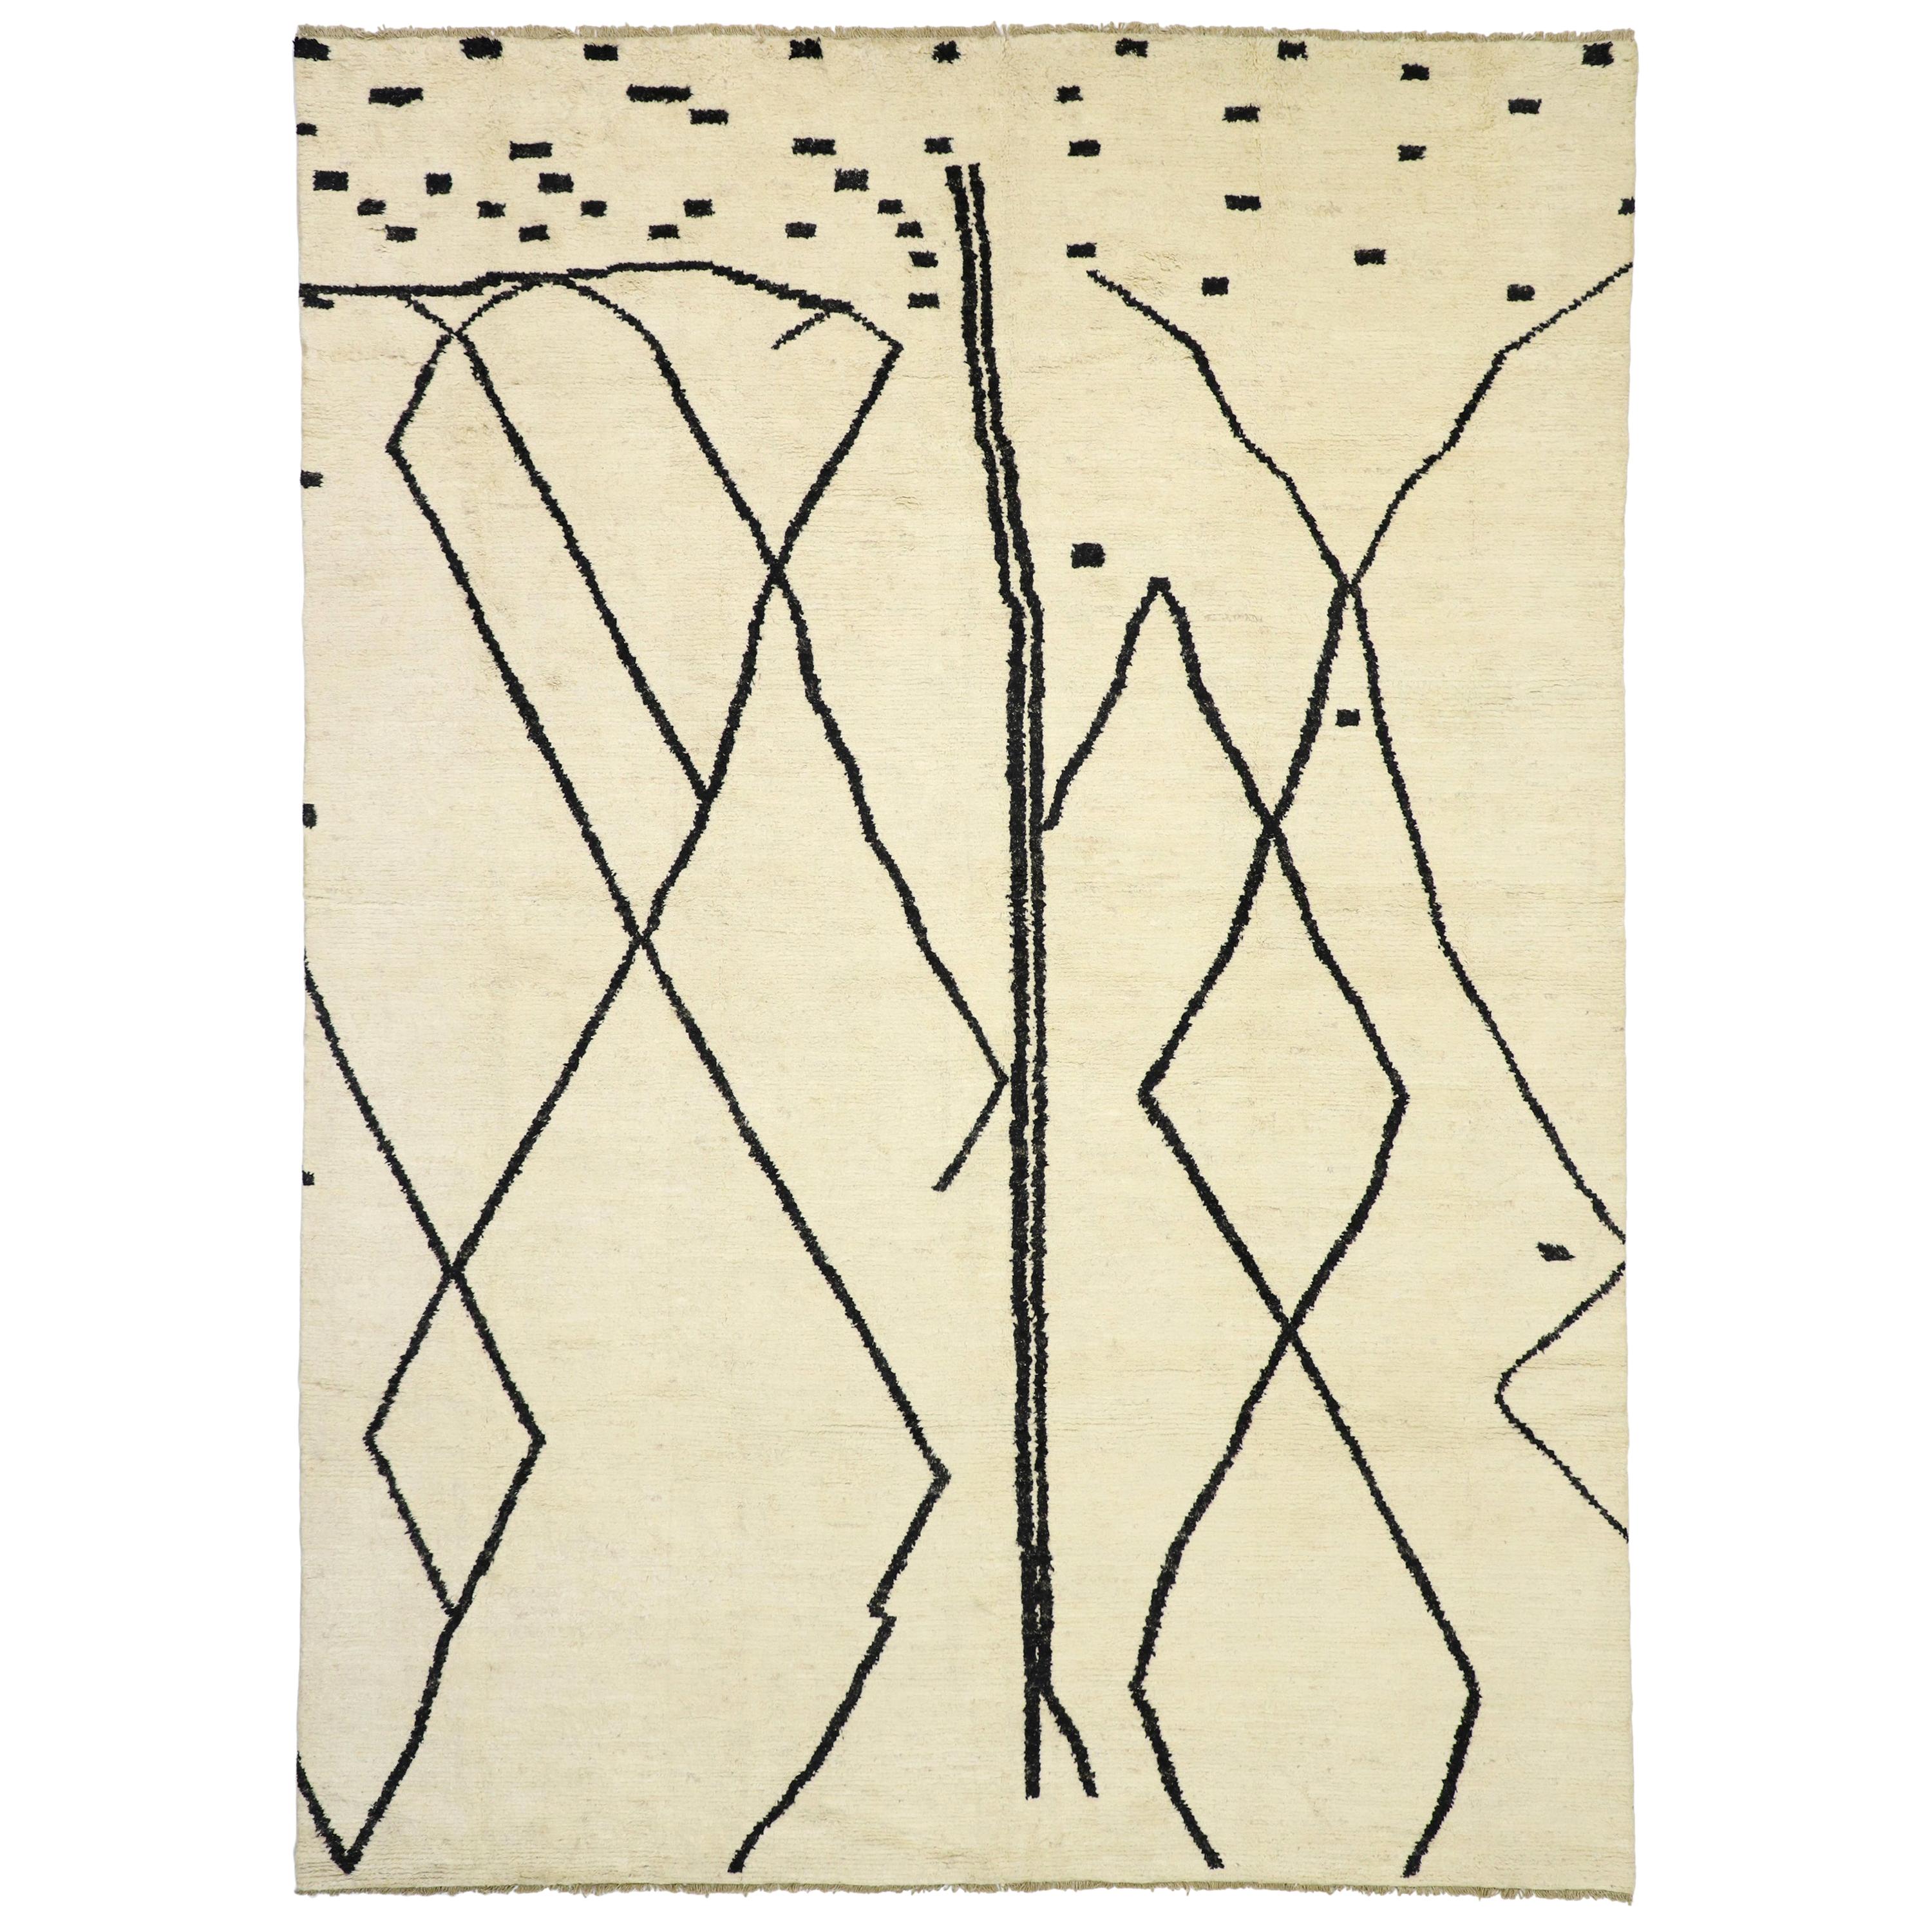 Contemporary Tribal Moroccan Rug, Organic Modern Meets Subtle Shibui For Sale